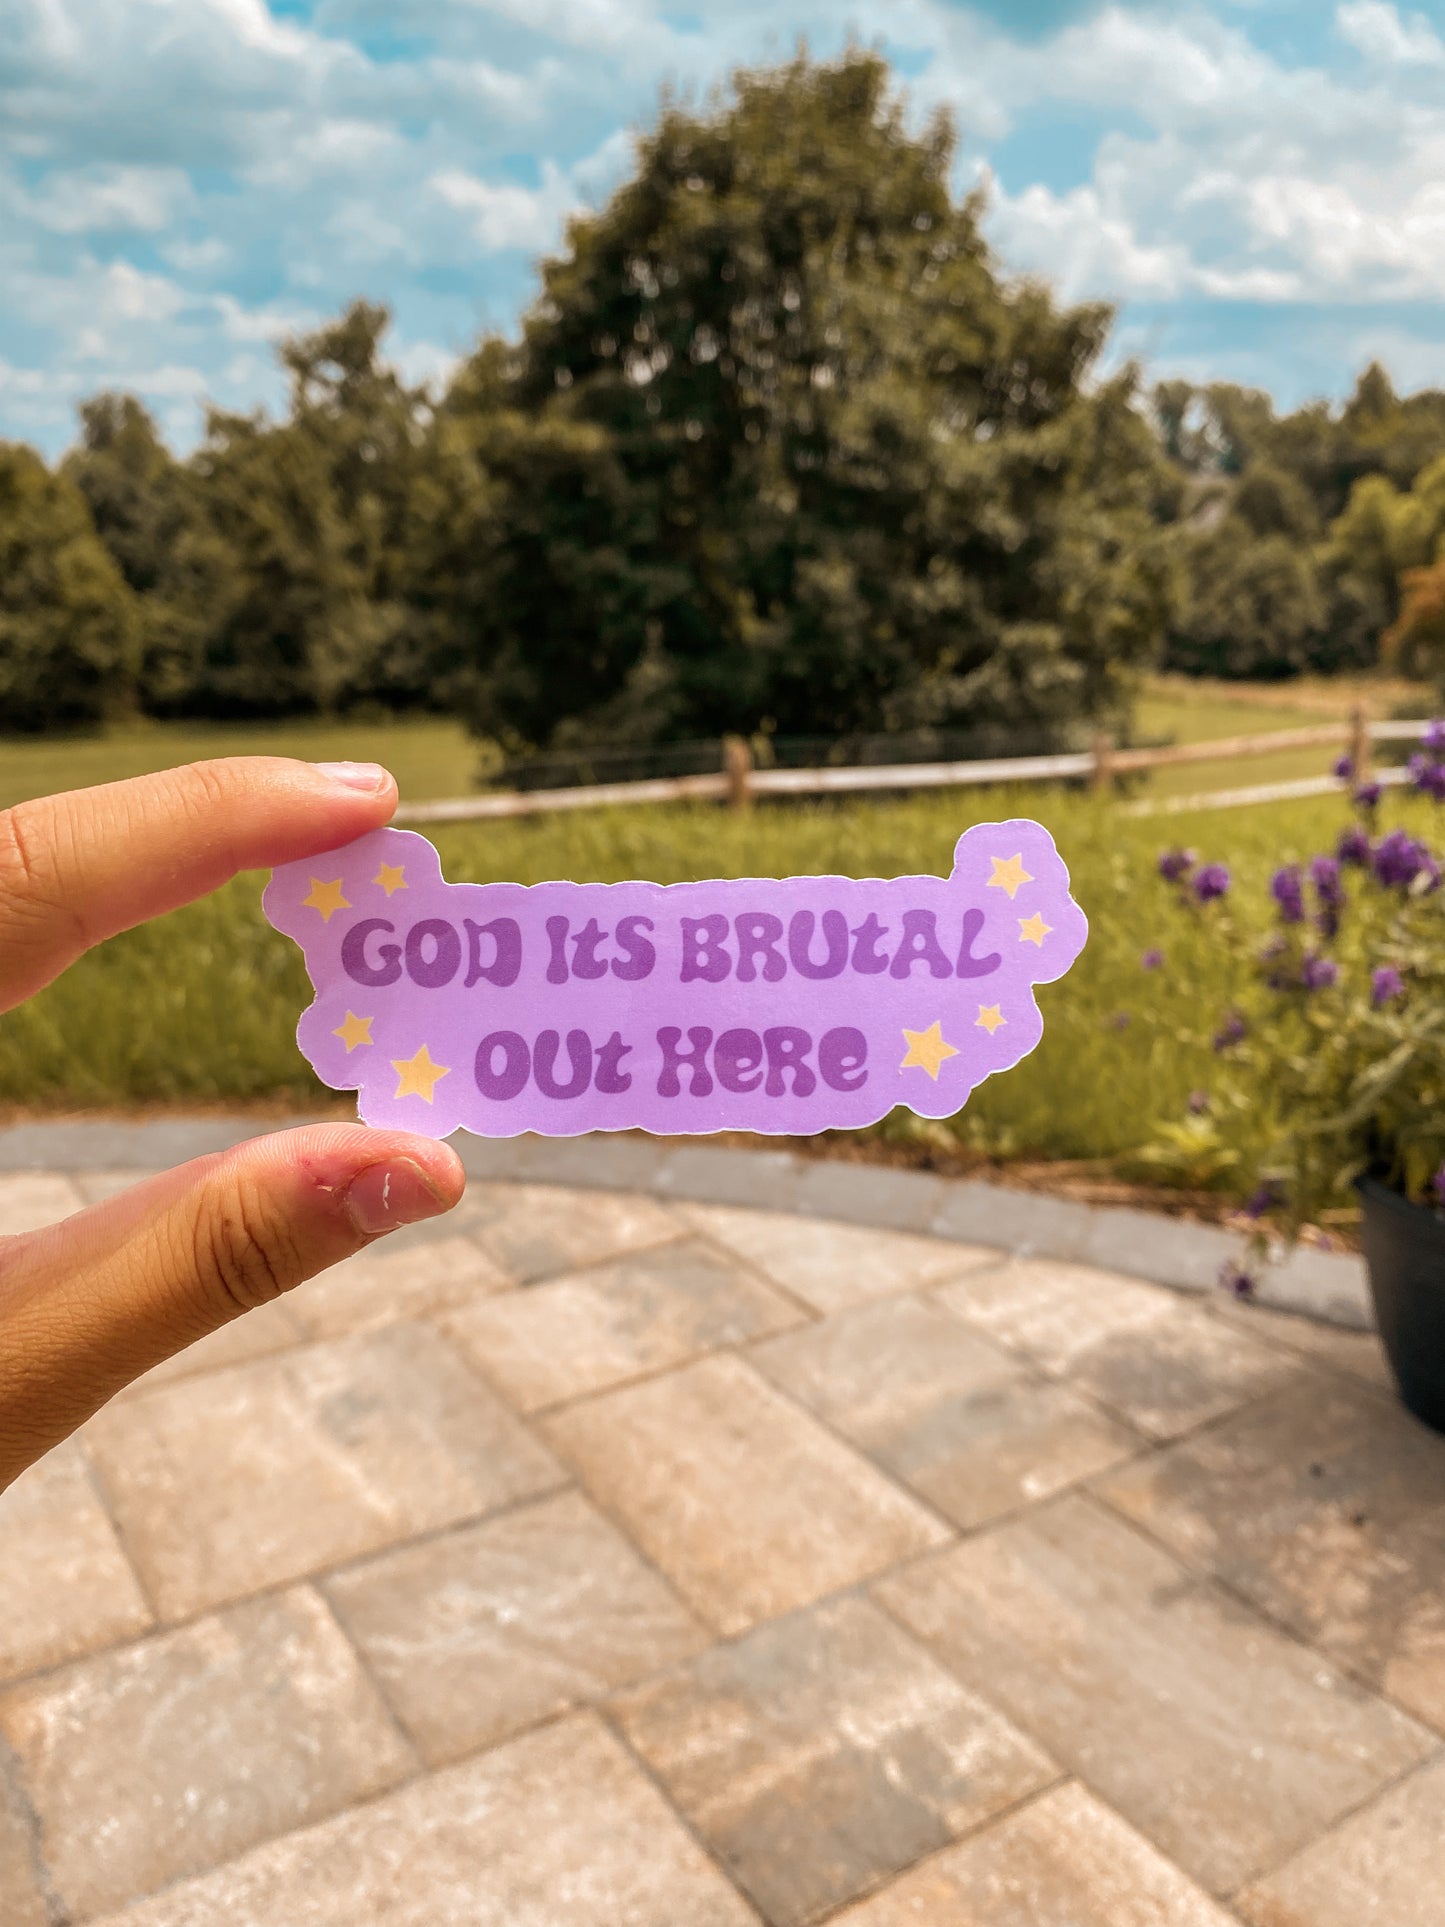 God its brutal out here sticker